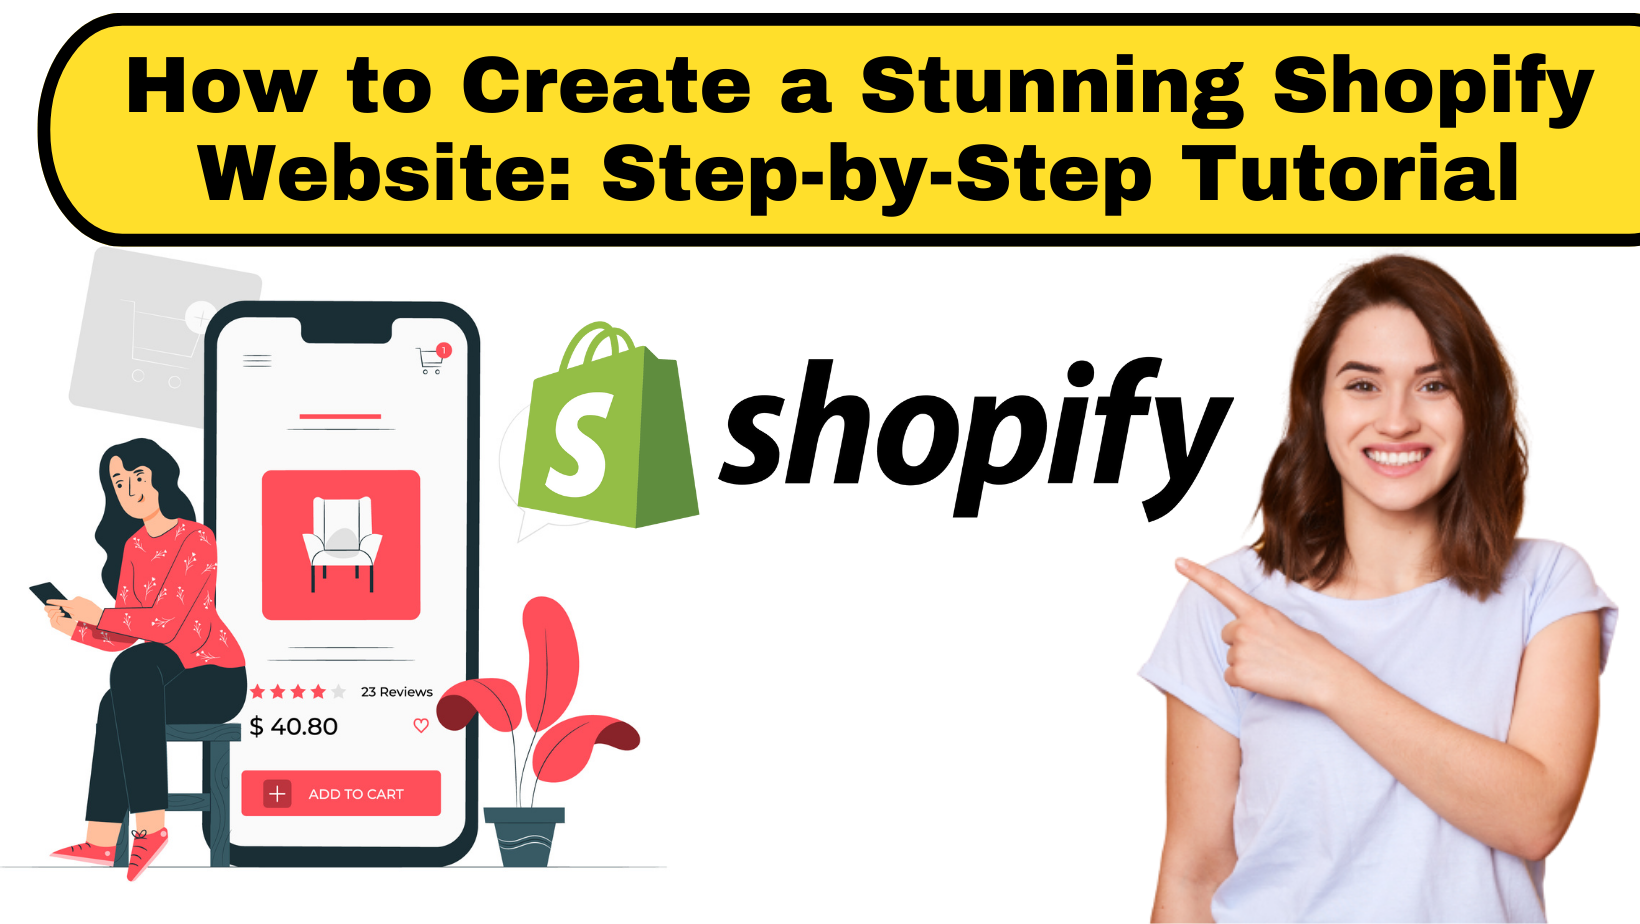  How to Create a Stunning Shopify Website: Step-by-Step Tutorial
